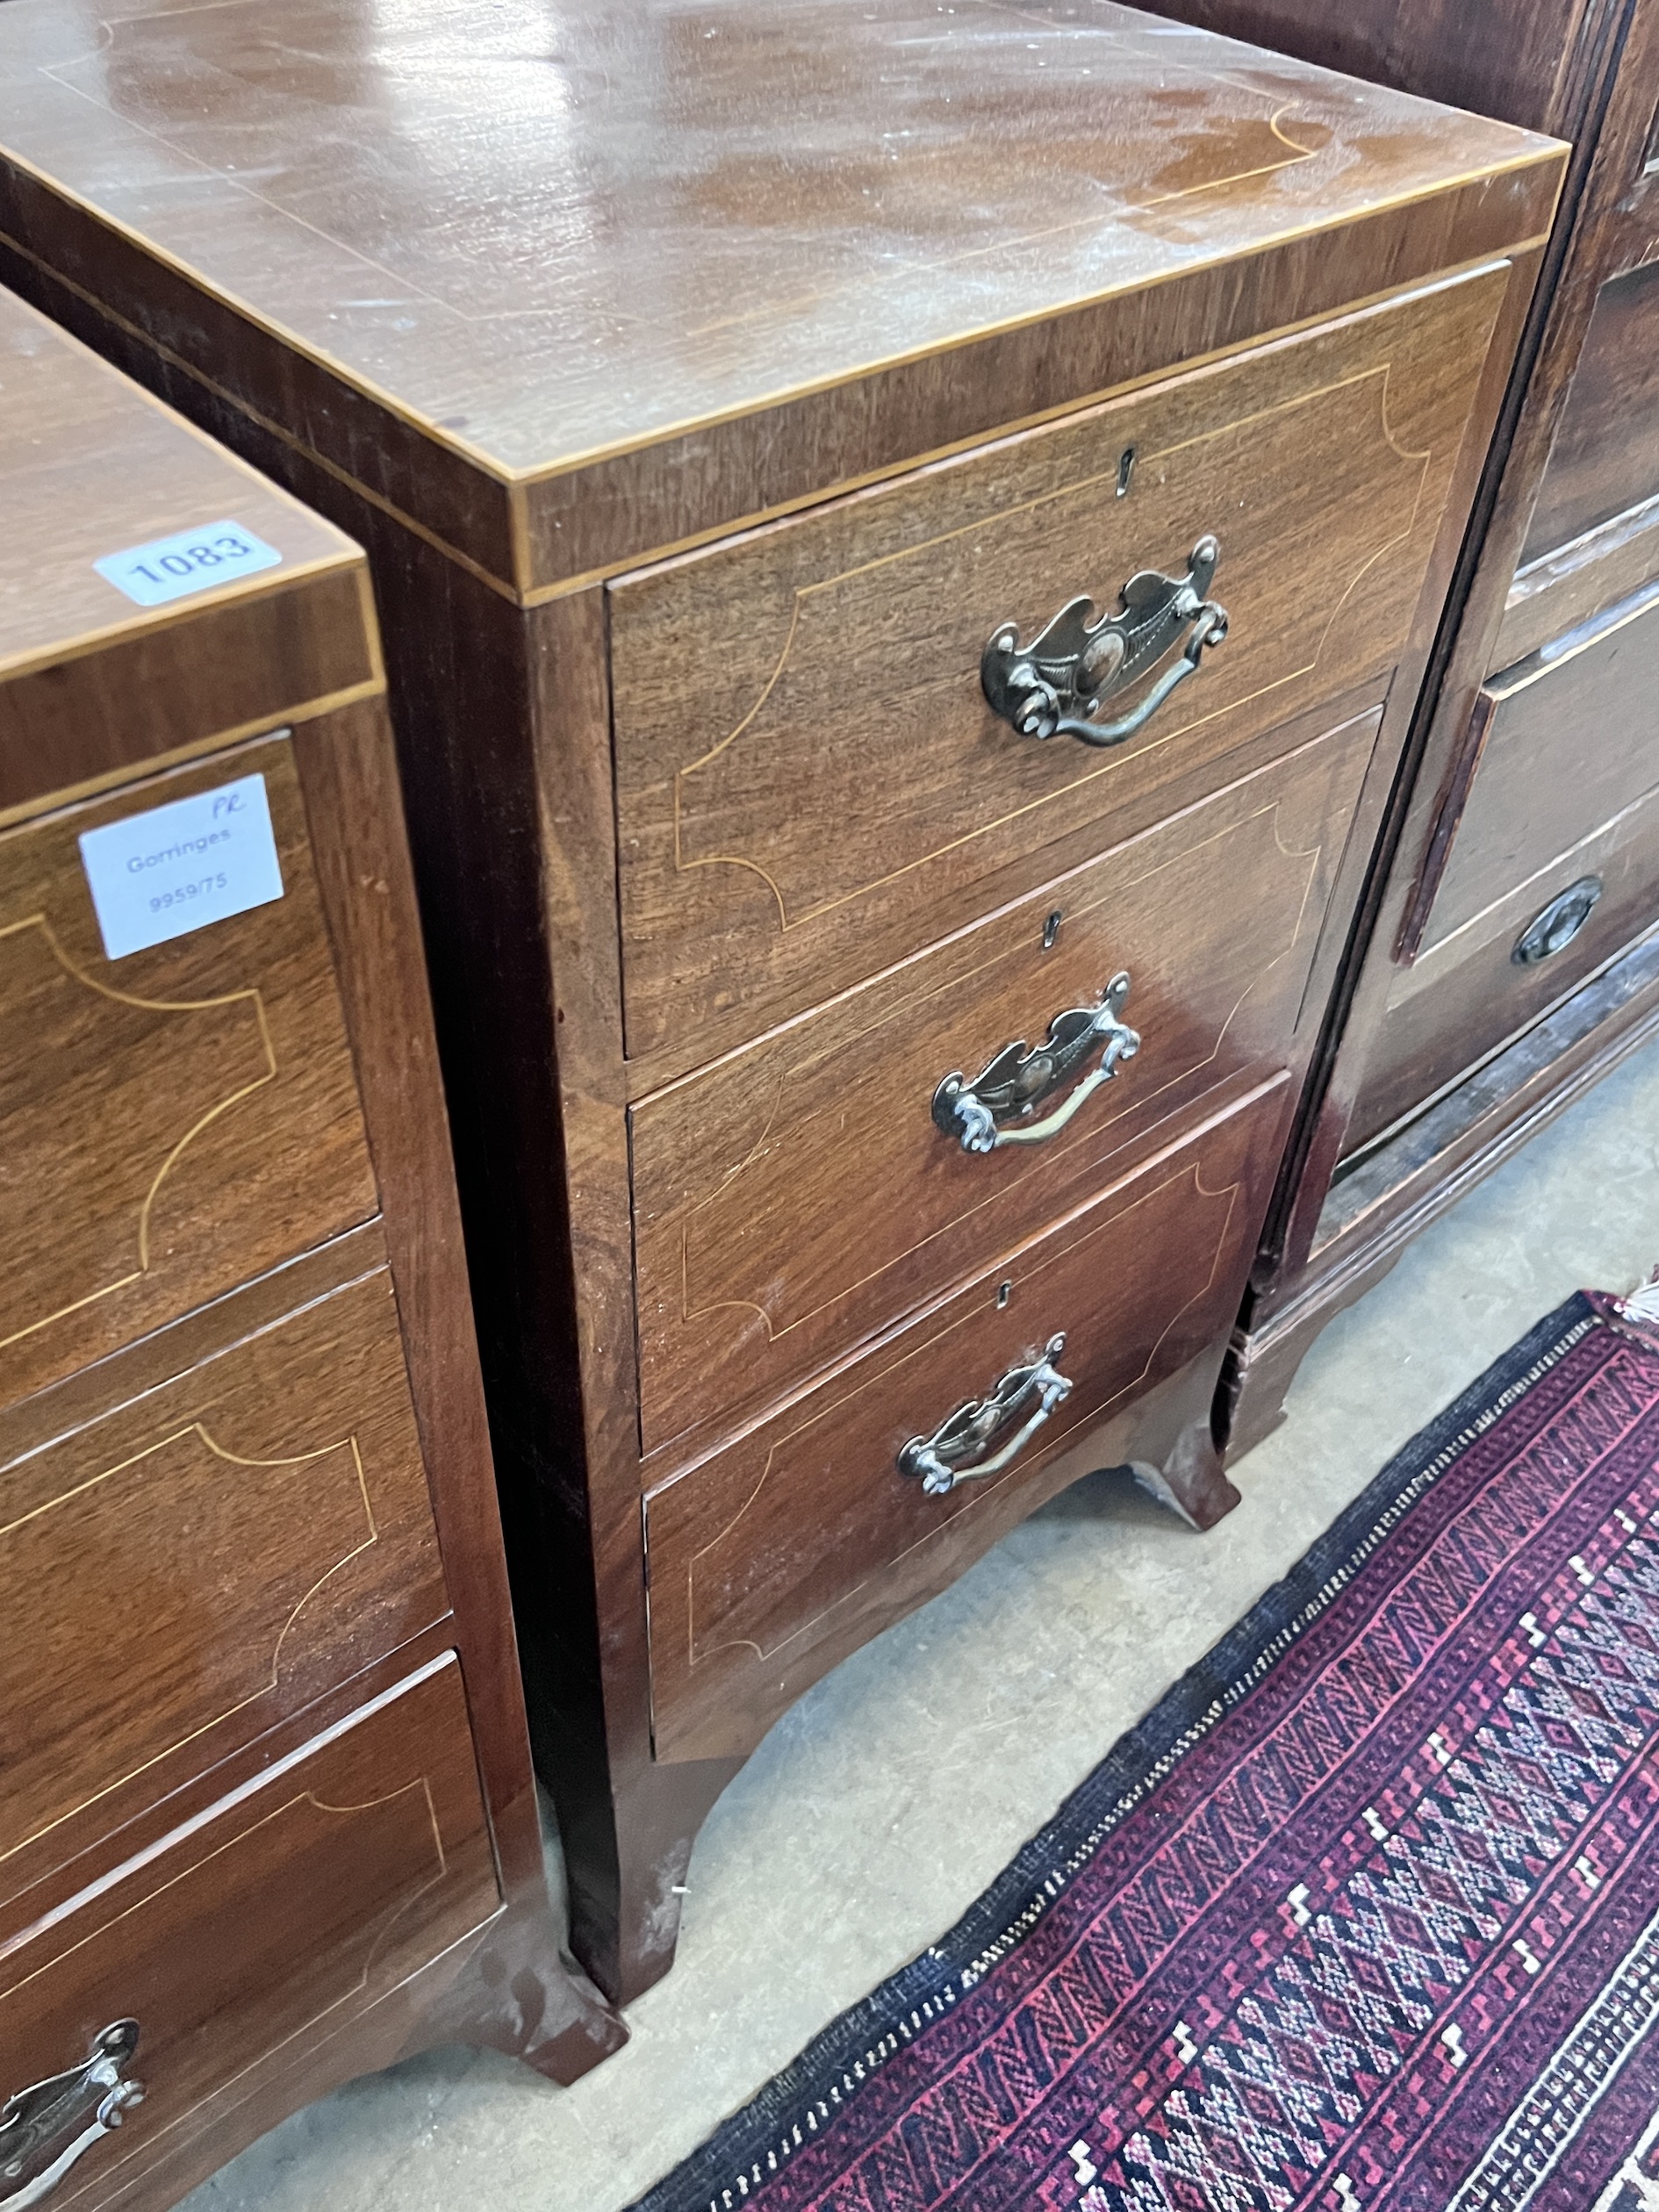 A pair of George III style inlaid mahogany bedside chests, width 43cm, depth 42cm, height 77cm